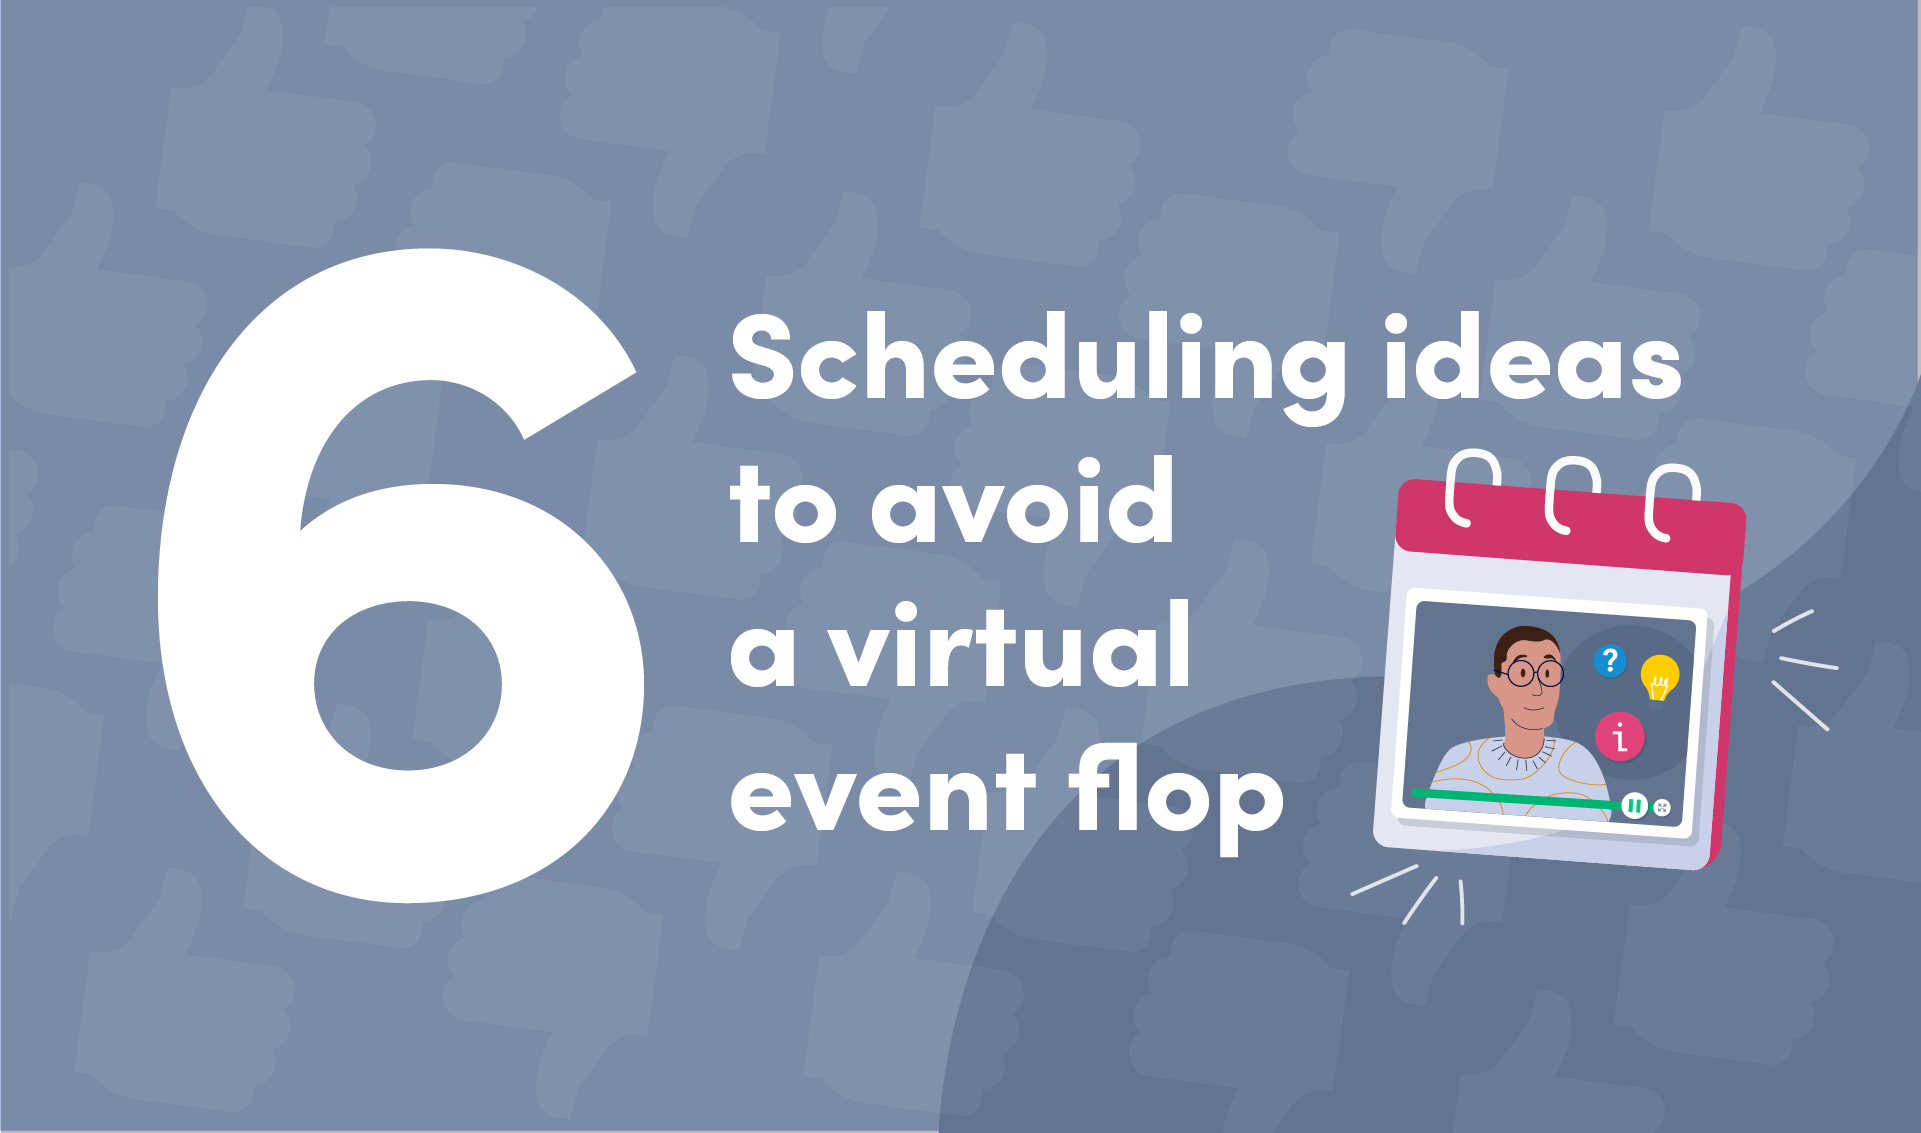 6 Scheduling ideas to avoid a virtual event flop